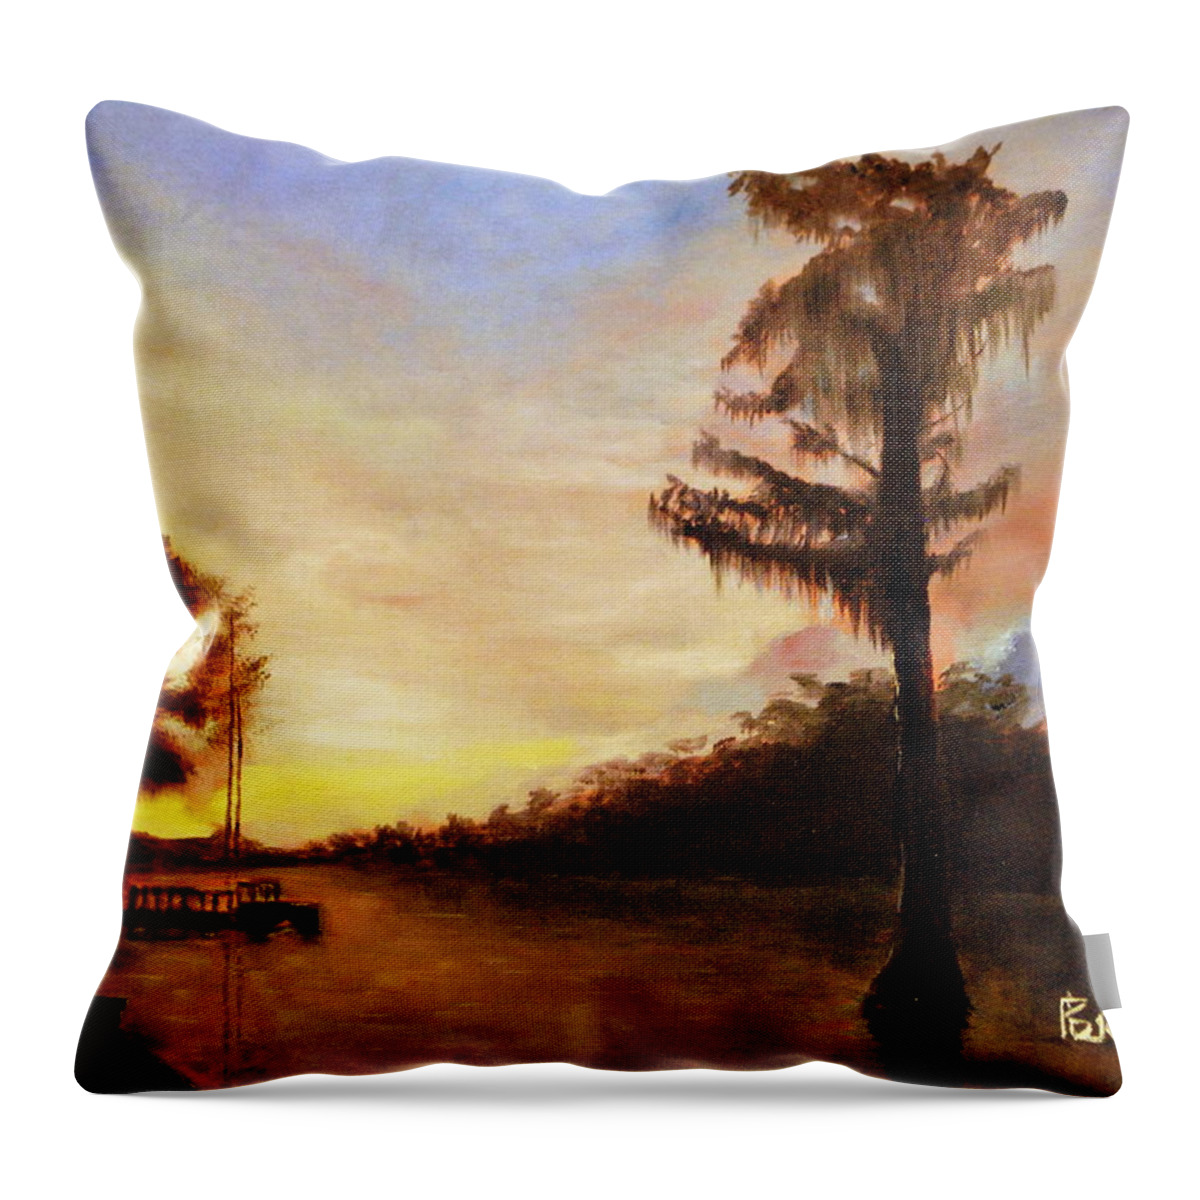 Landscape Painting From Memory And Photo Reference Throw Pillow featuring the painting Waccamaw Evening by Phil Burton